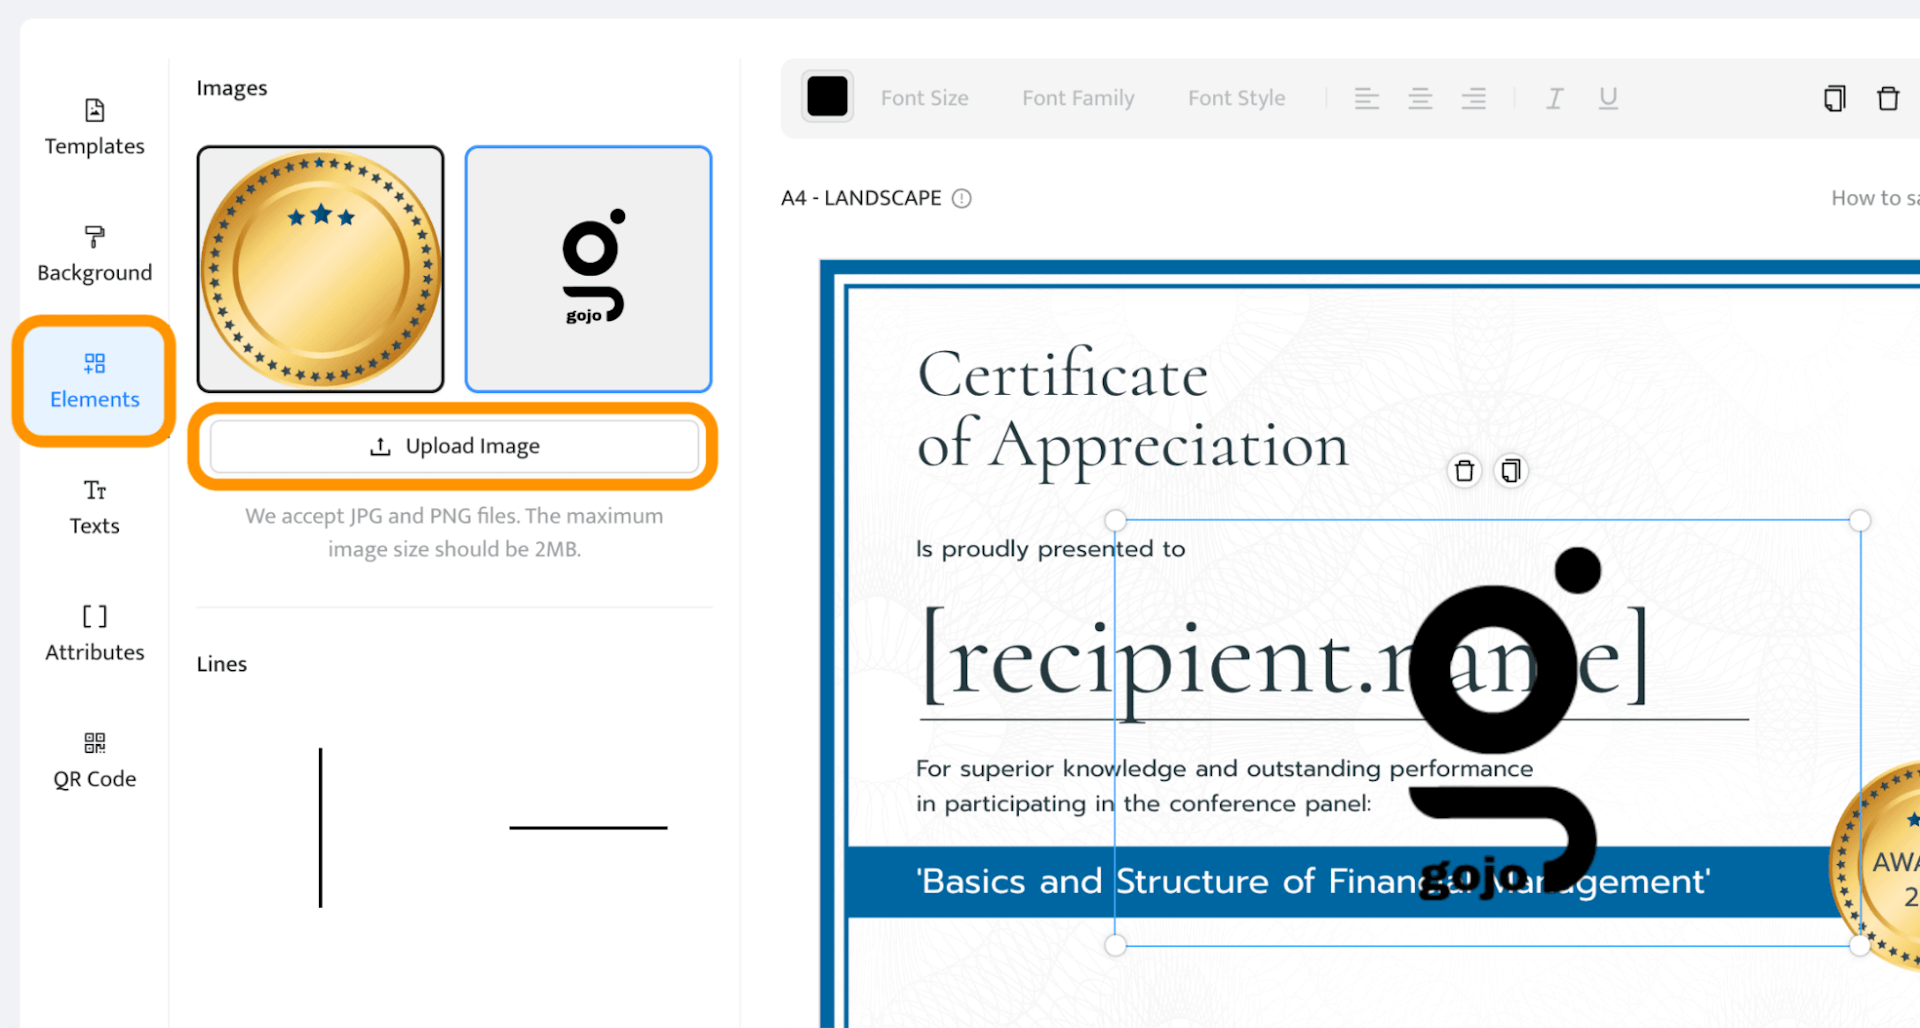 Uploading own images and the screen showing how to make certificate of appreciation.